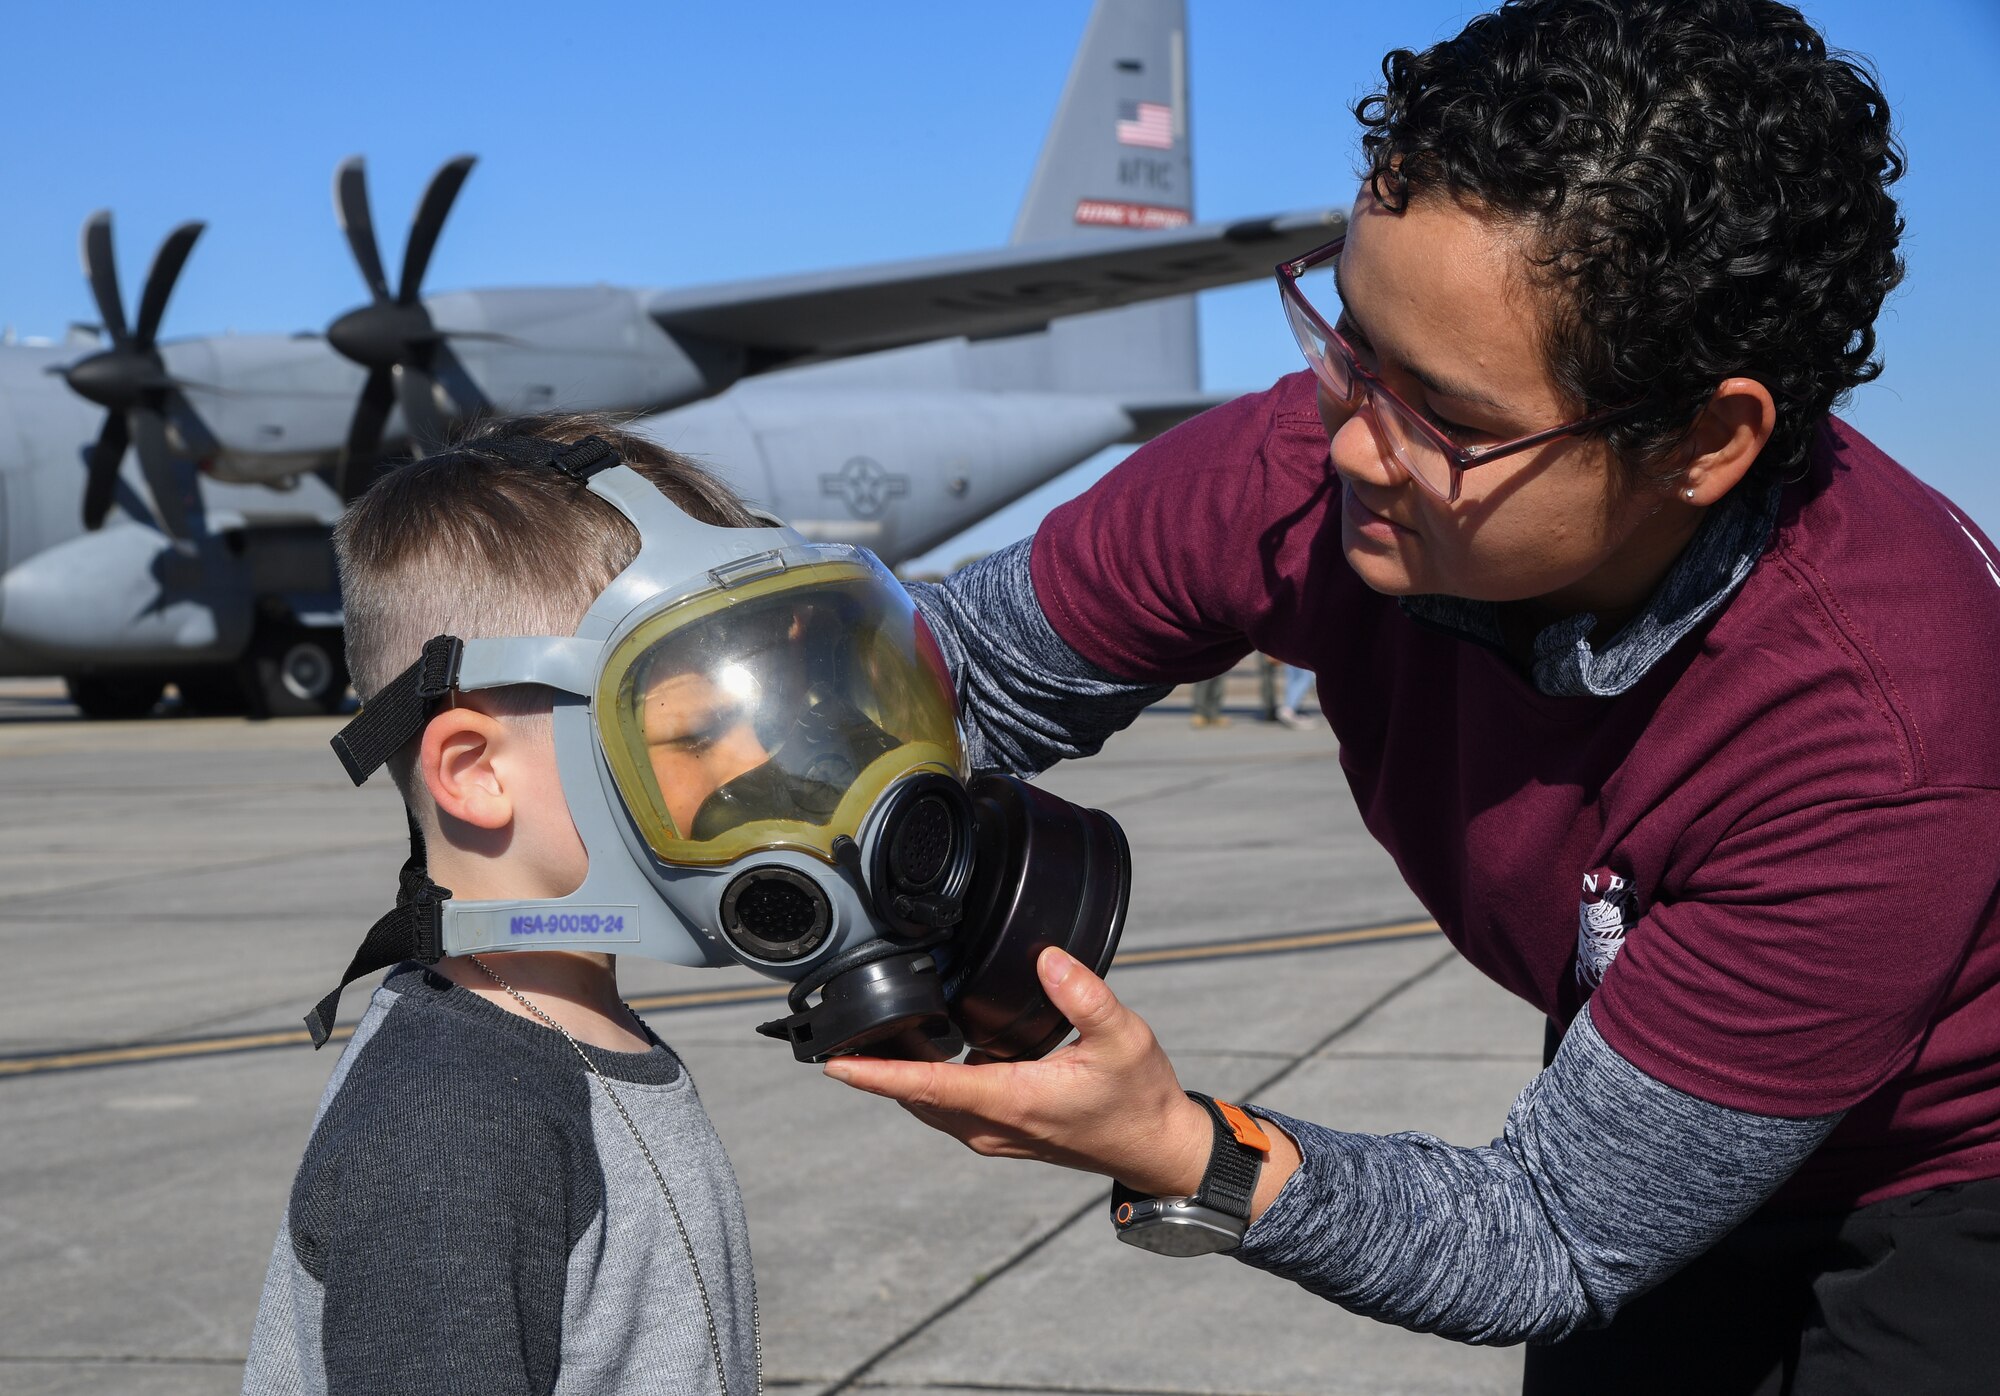 U.S. Air Force Airman 1st Class Christina Piper, 336th Training Squadron student, secures a gas mask on Benjamin Kuc, son of Lt. Col. Katherine Kuc, 81st Force Support Squadron commander, during Operation Hero at Keesler Air Force Base, Mississippi, March 4, 2023.